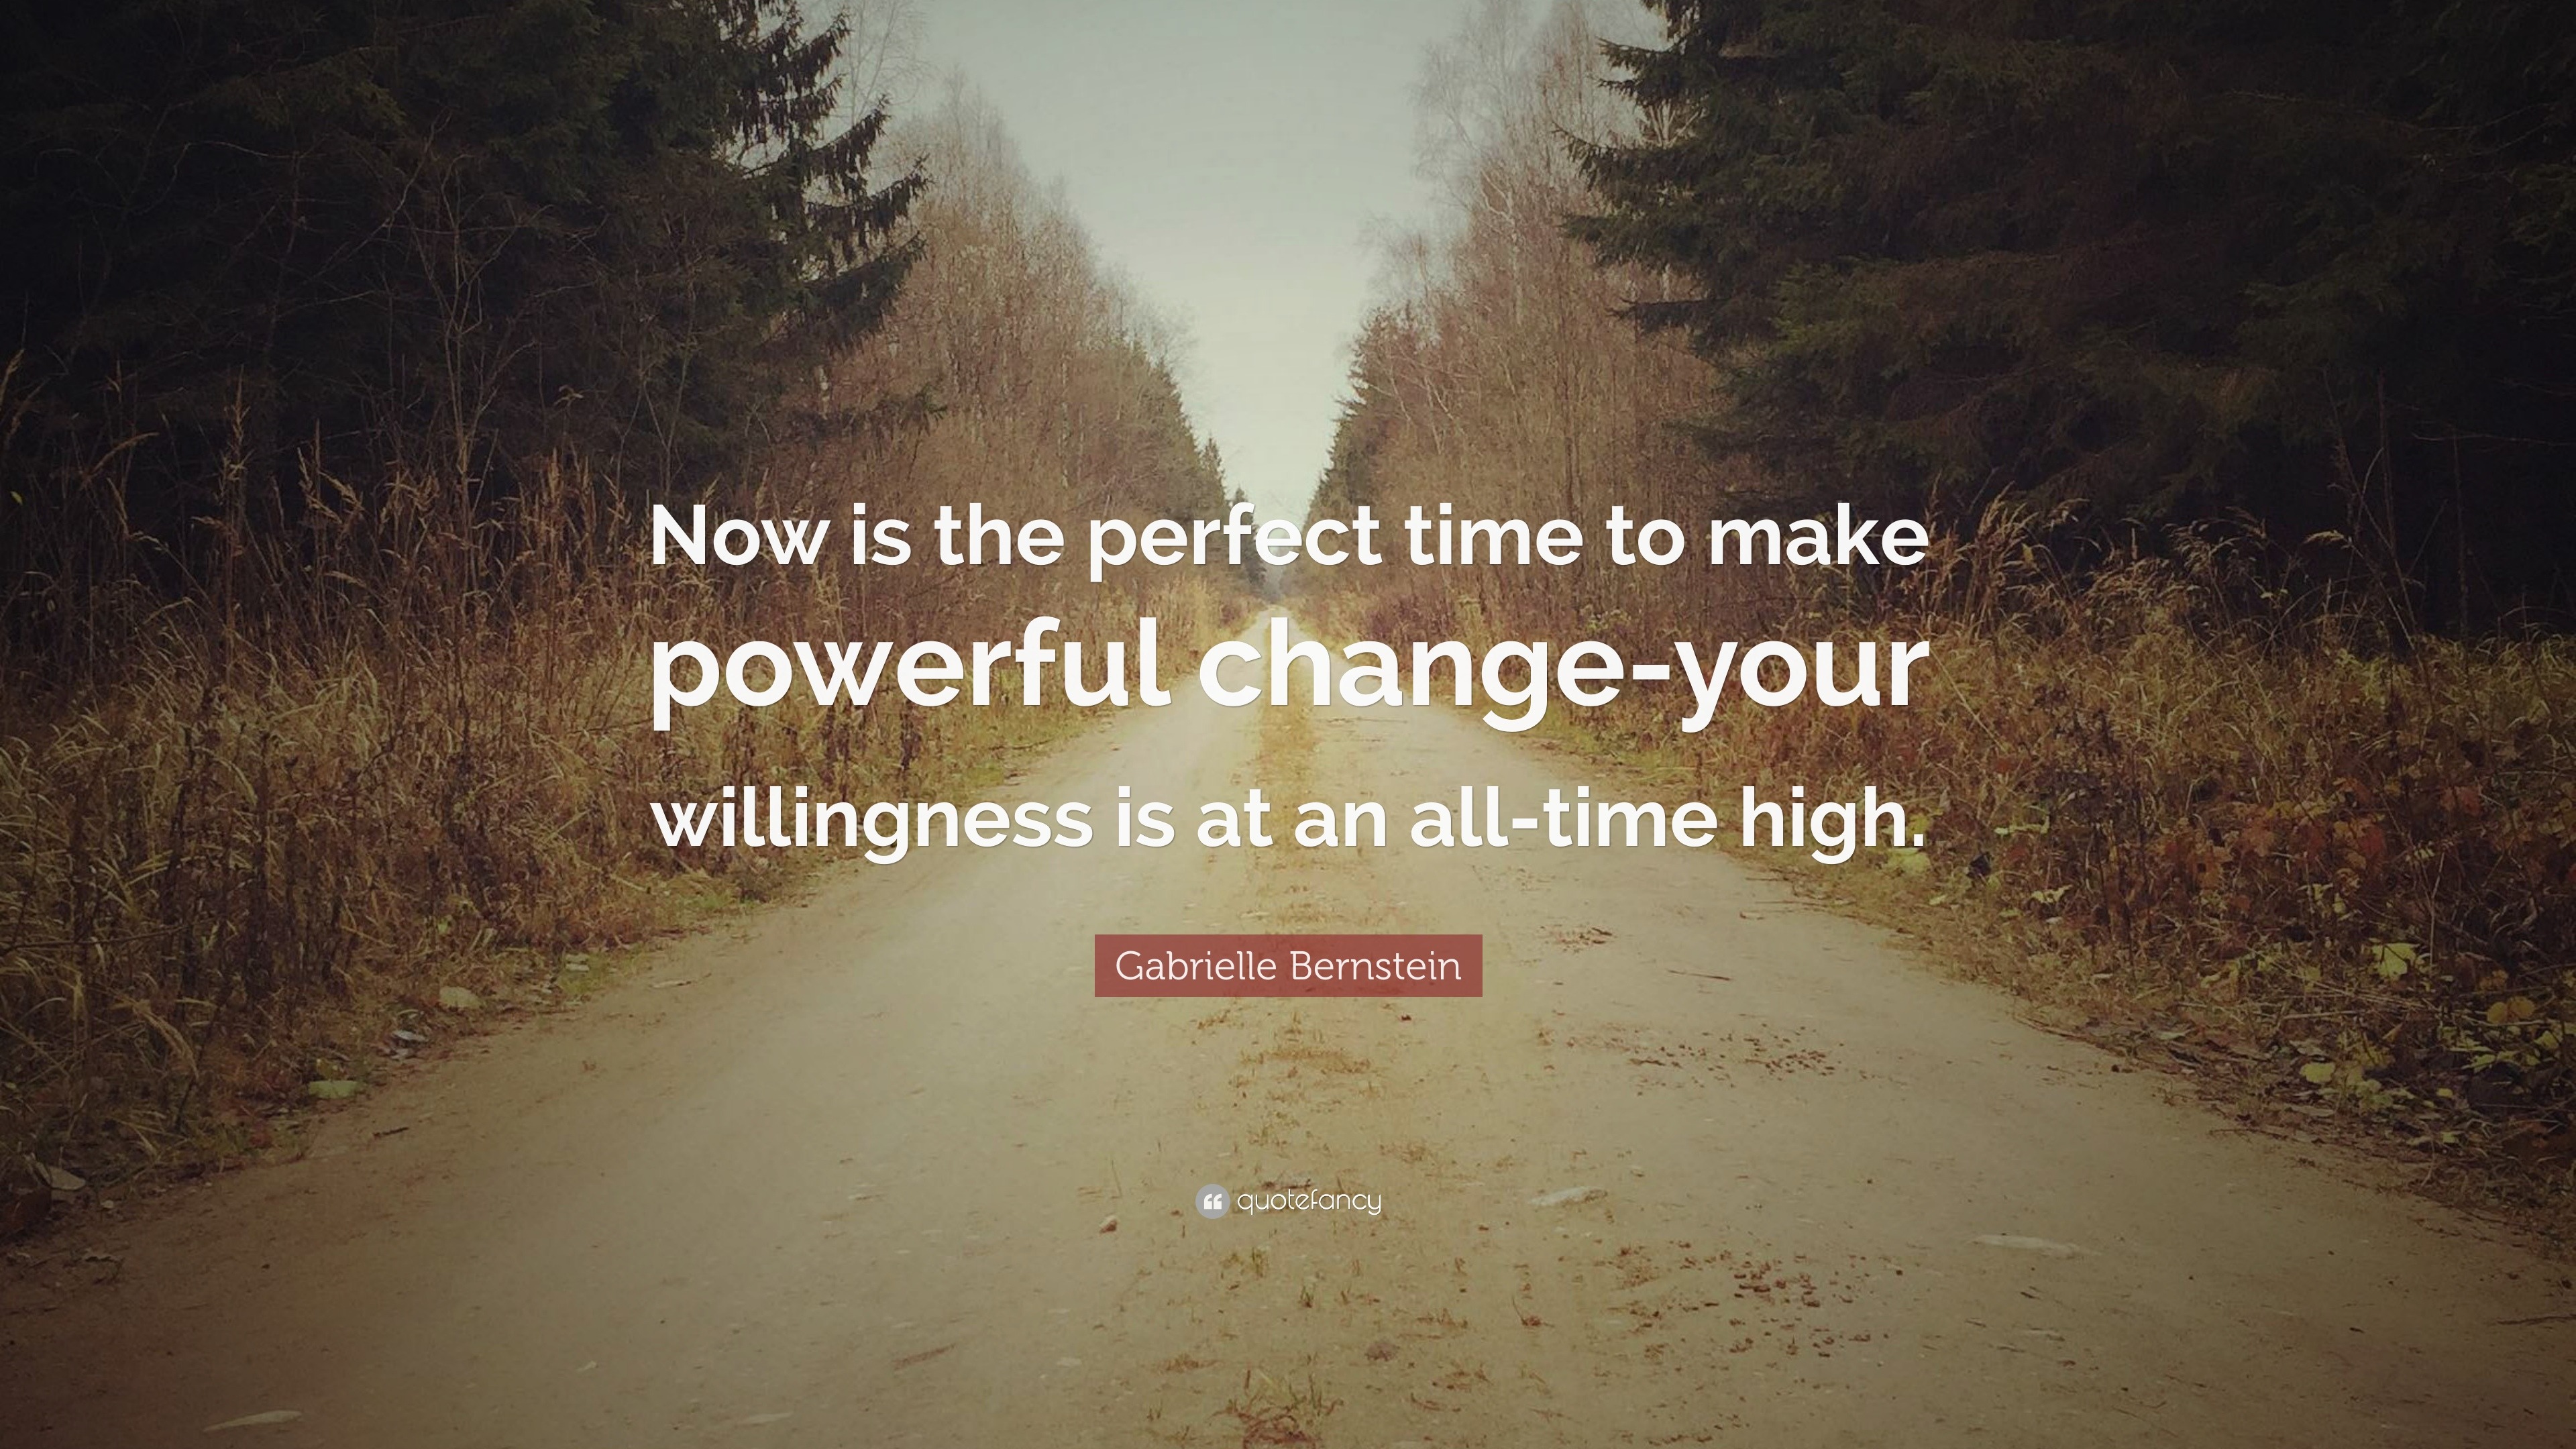 Gabrielle Bernstein Quote: “Now is the perfect time to make powerful